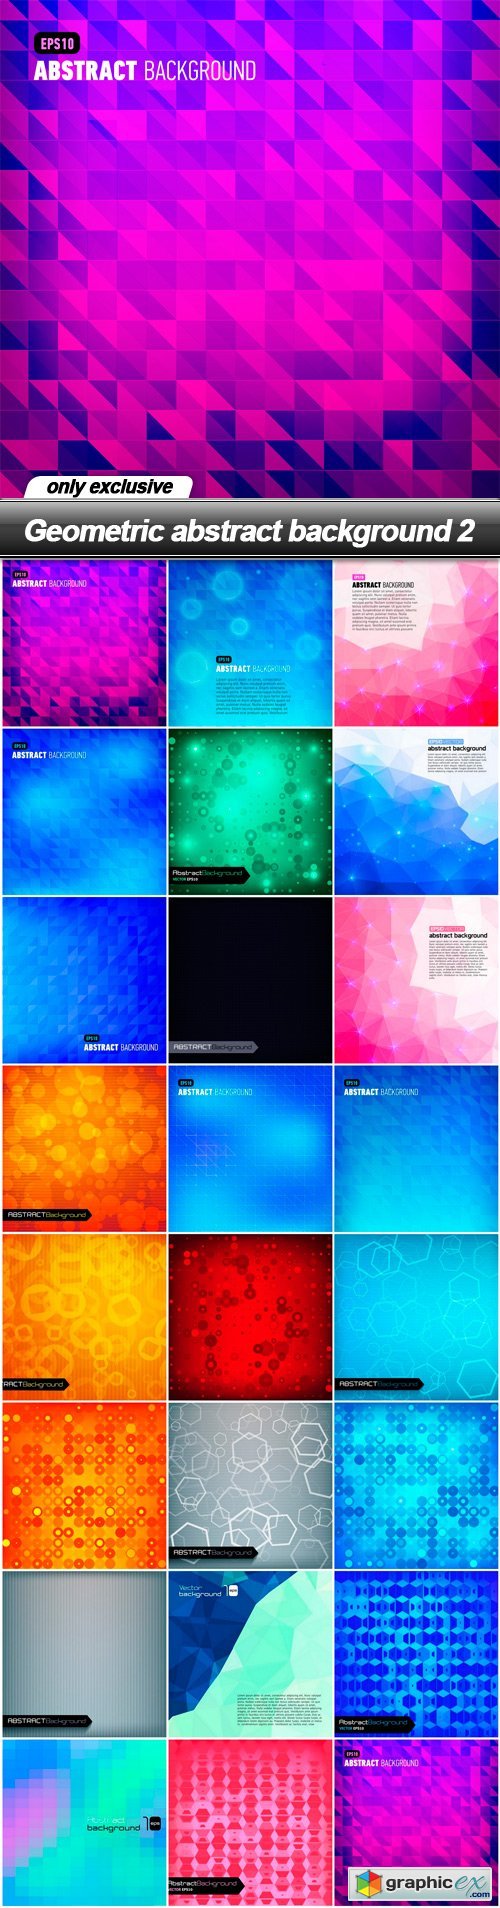 Geometric abstract background 2 - 23 EPS